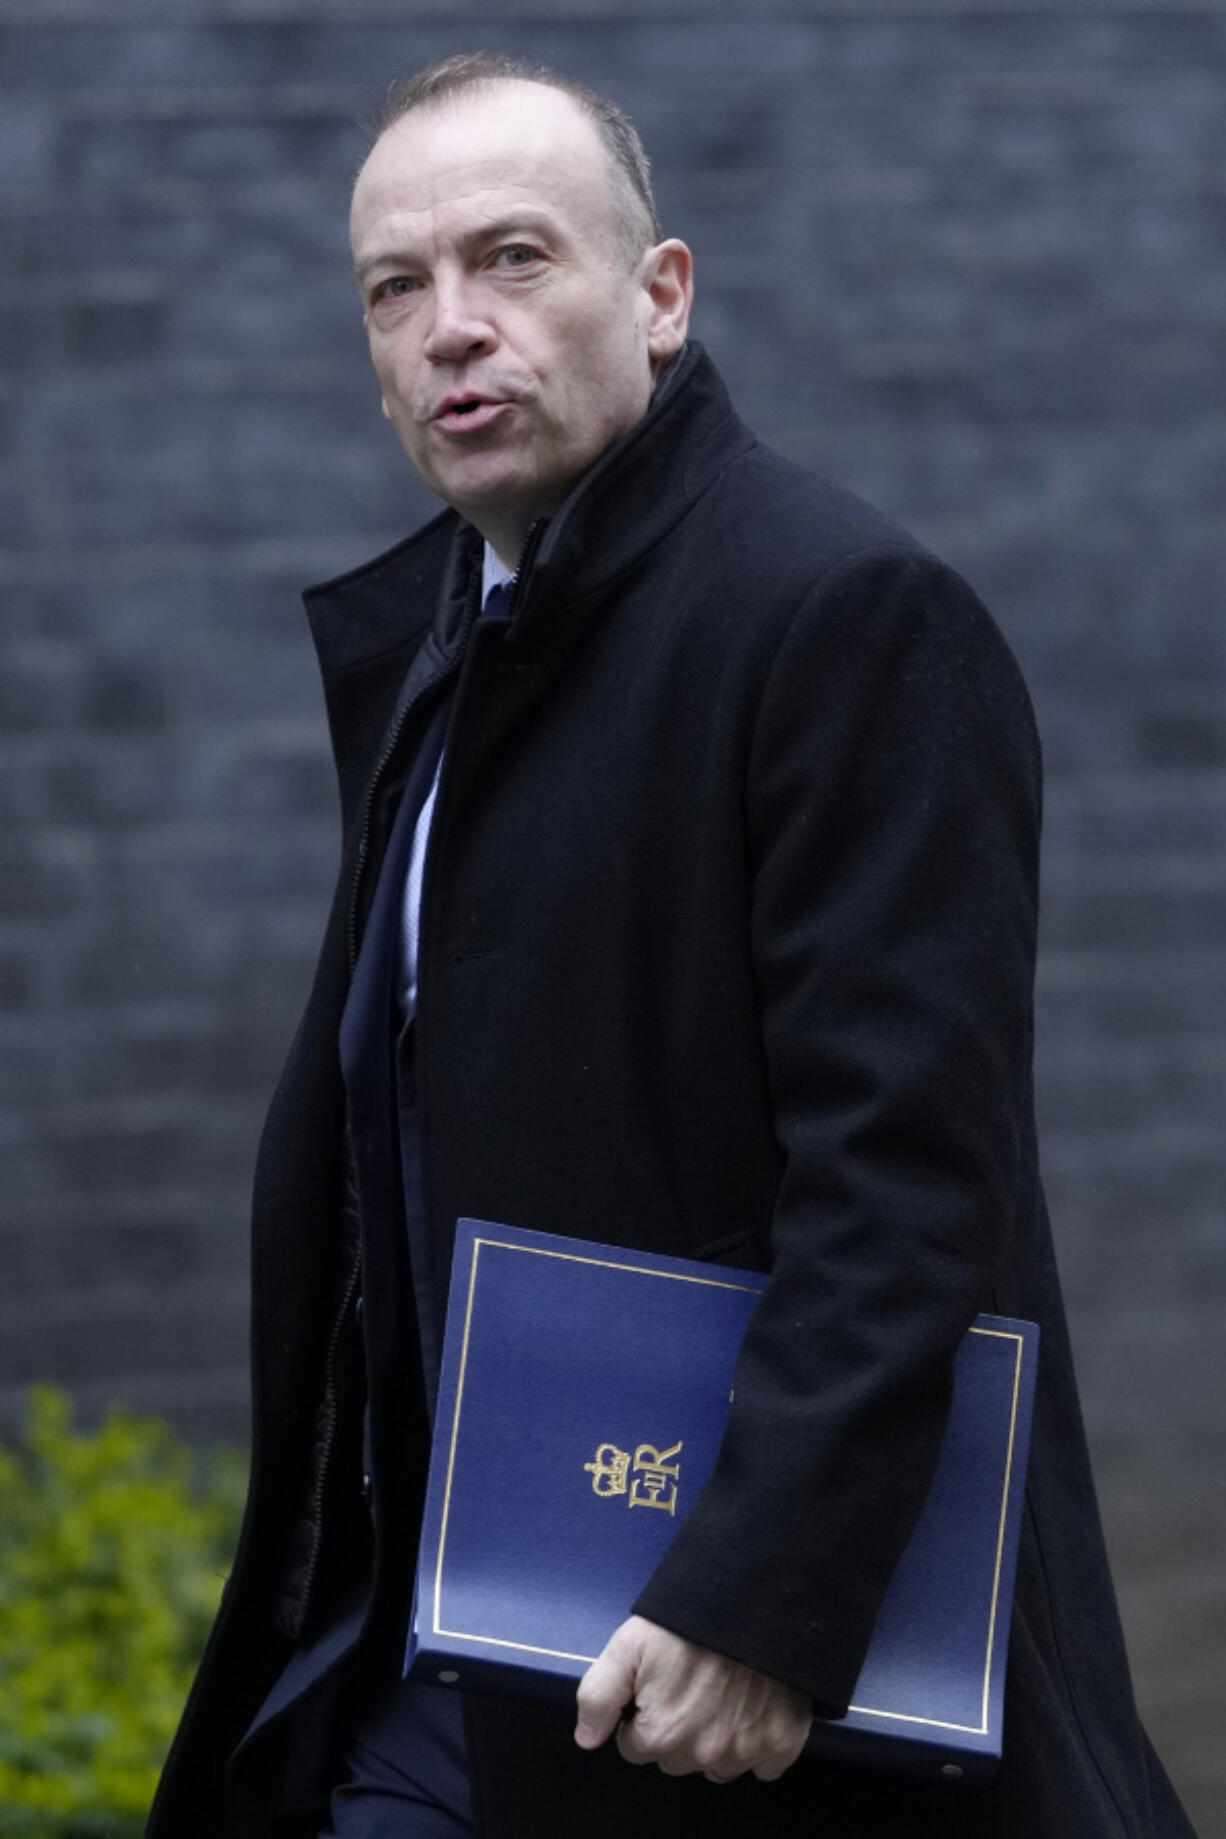 Secretary of State for Northern Ireland Chris Heaton-Harris arrives for a Cabinet meeting at 10 Downing Street in London, Tuesday, March 28, 2023.